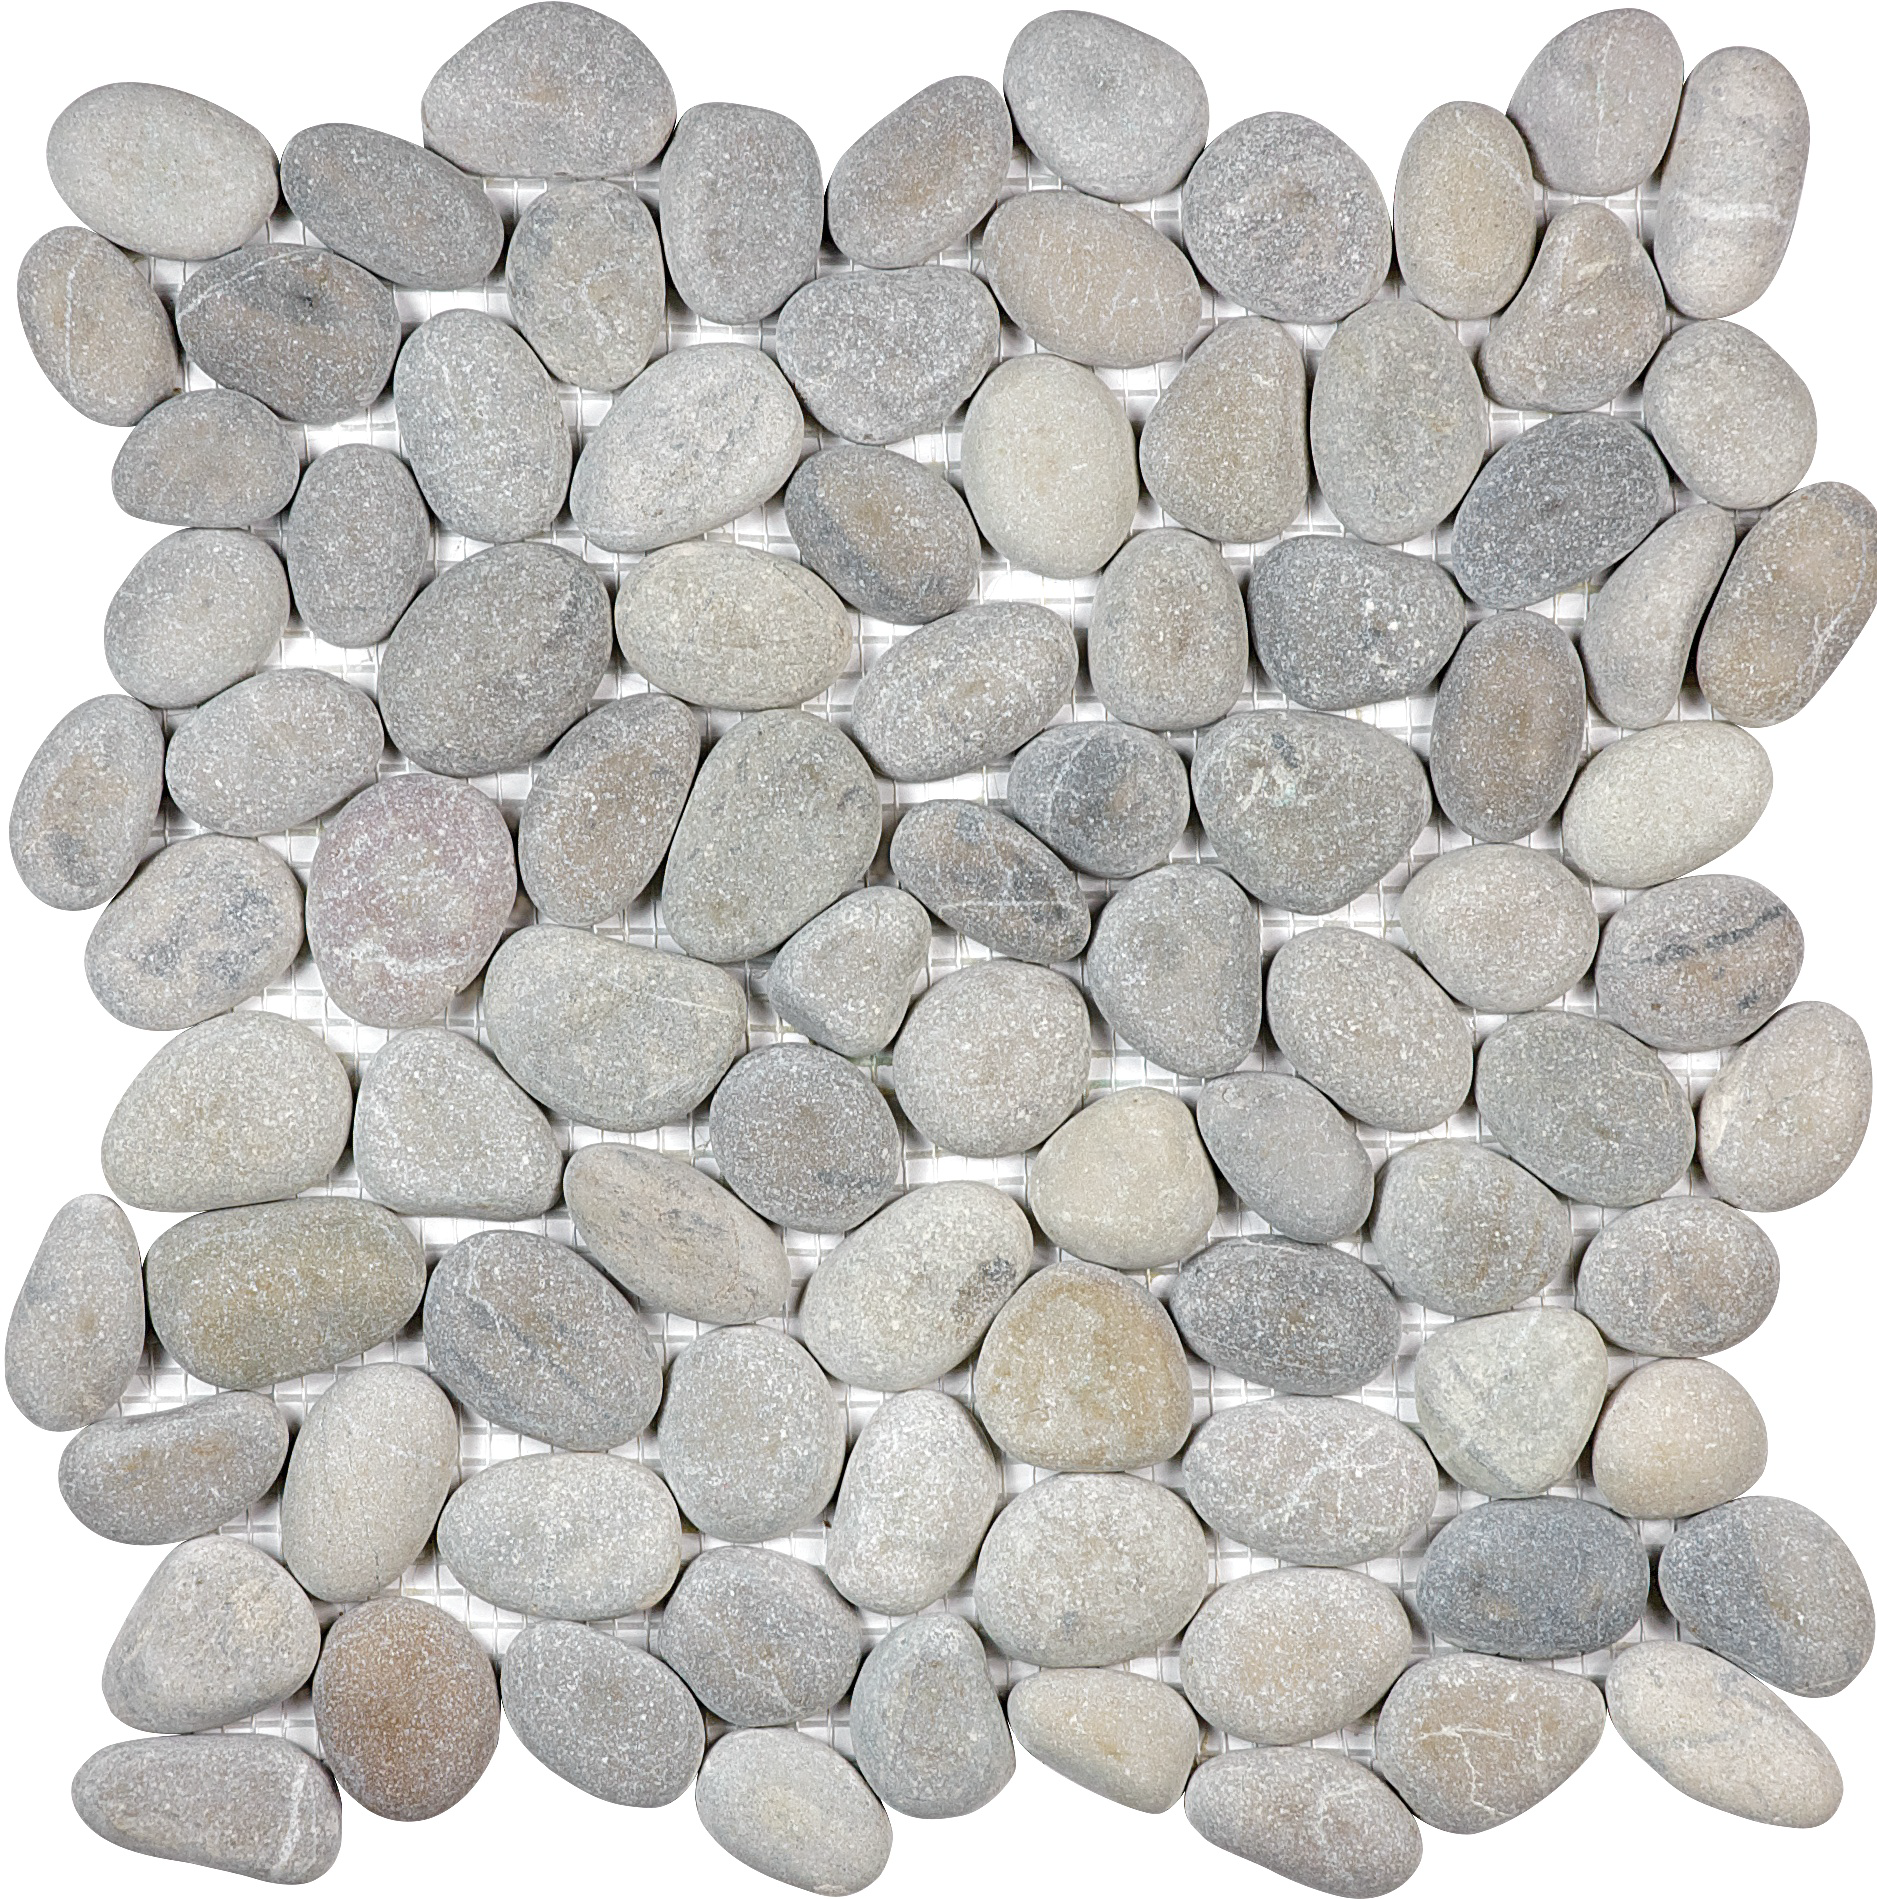 pebble vitality mica natural pebble pattern natural stone mosaic from zen anatolia collection distributed by surface group international matte finish straight edge edge mesh shape